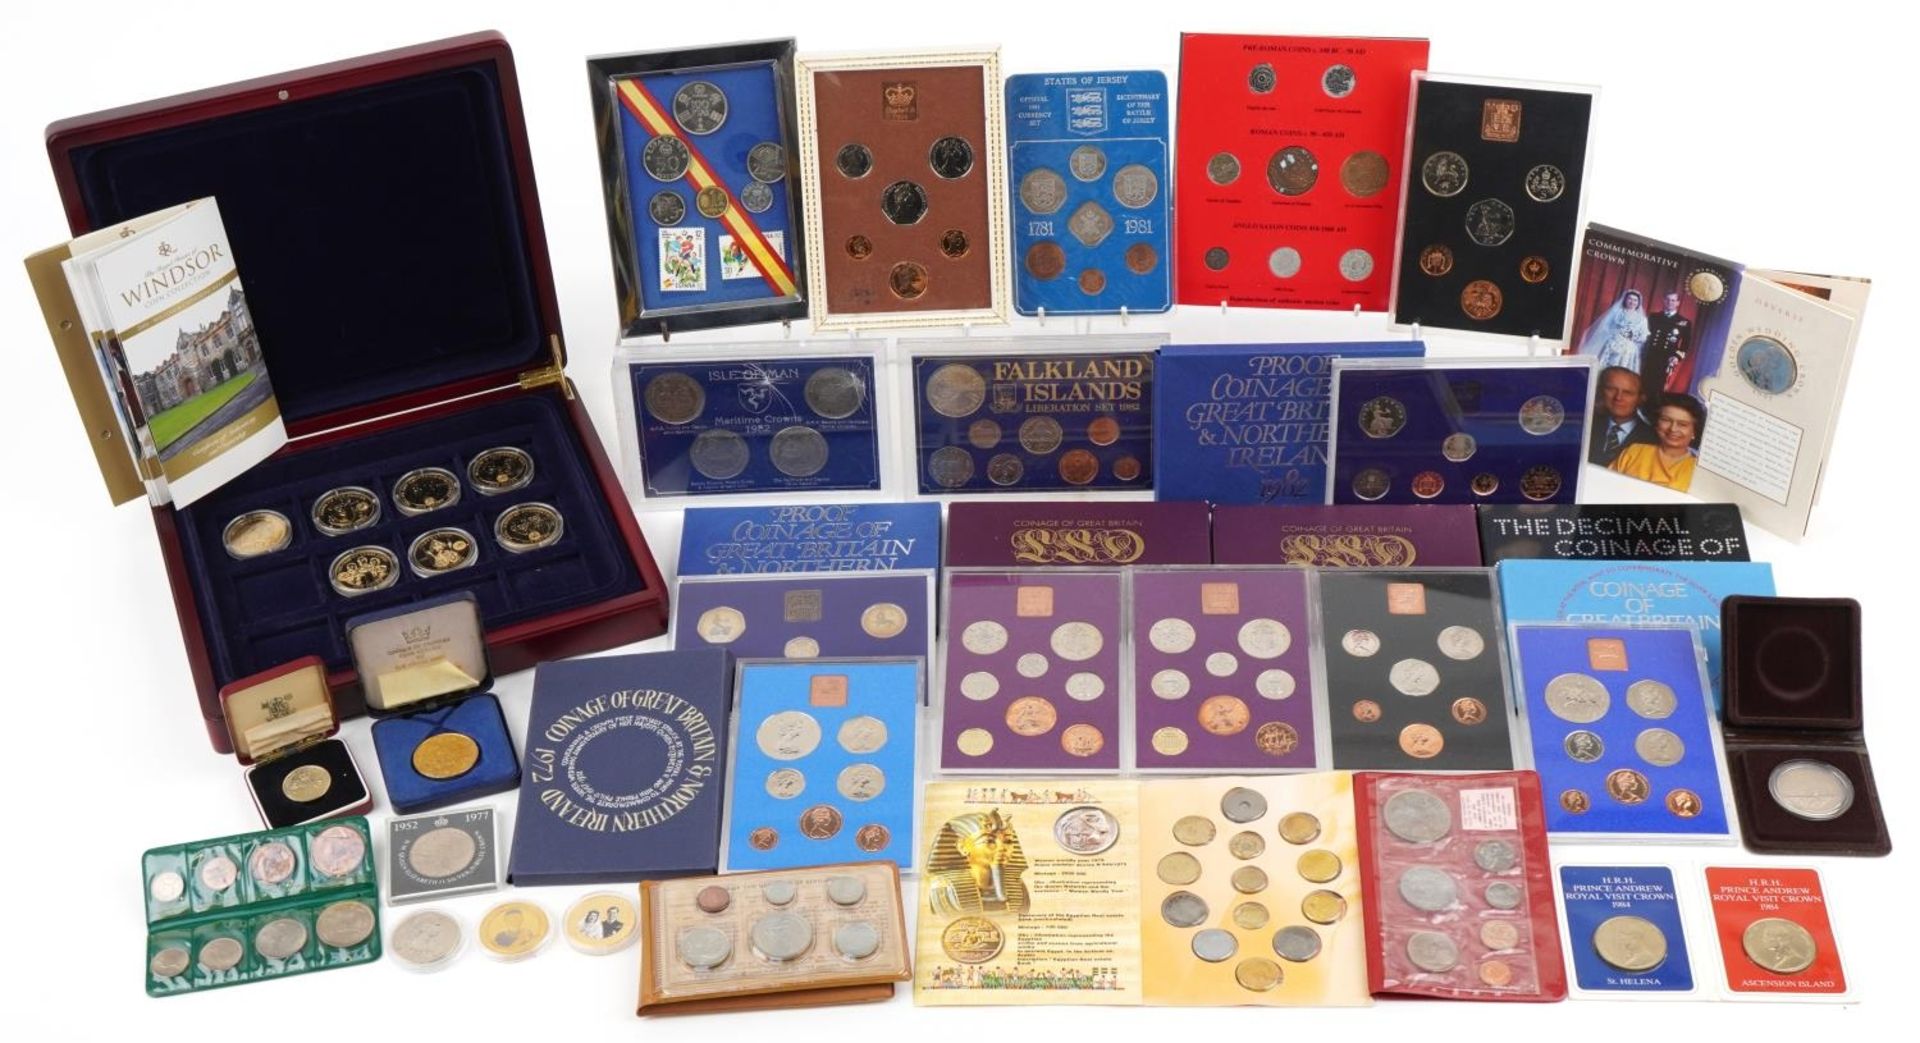 British and Channel Island coinage including Falklands Islands Liberation set, Proof Coinage of